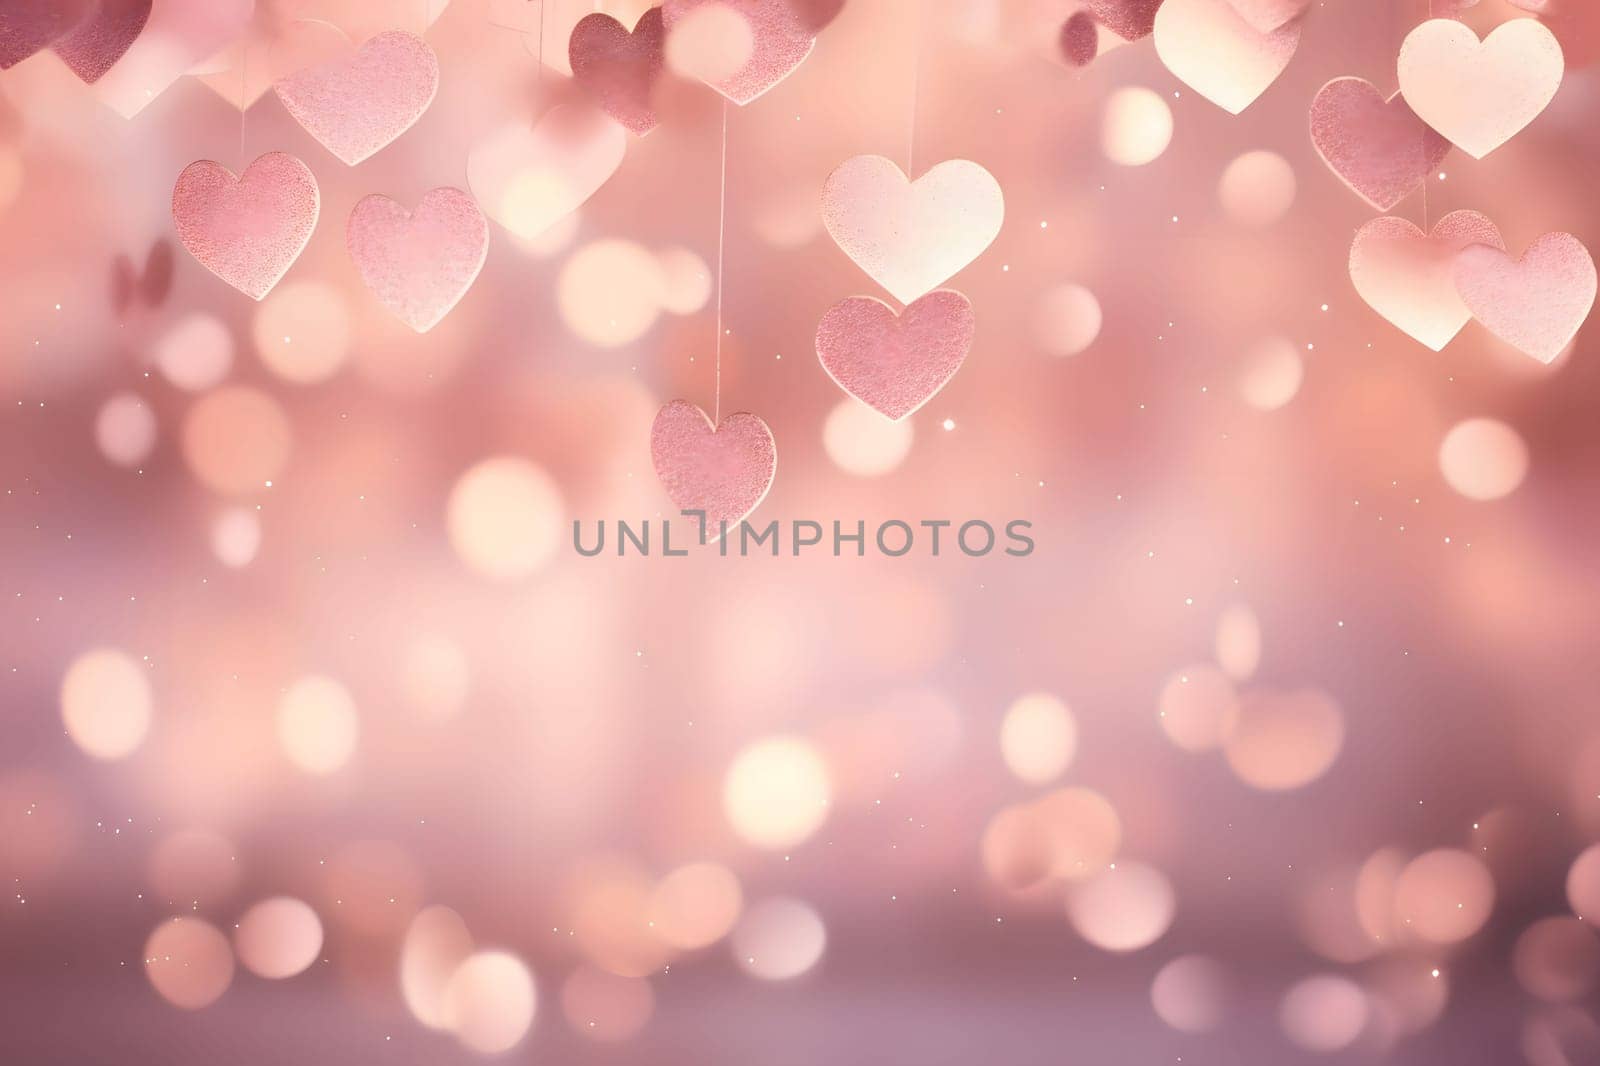 Colorful: pink and white hearts on a light background, confetti,New Year's Eve bright background, banner with space for your own content. Blank space for the inscription.